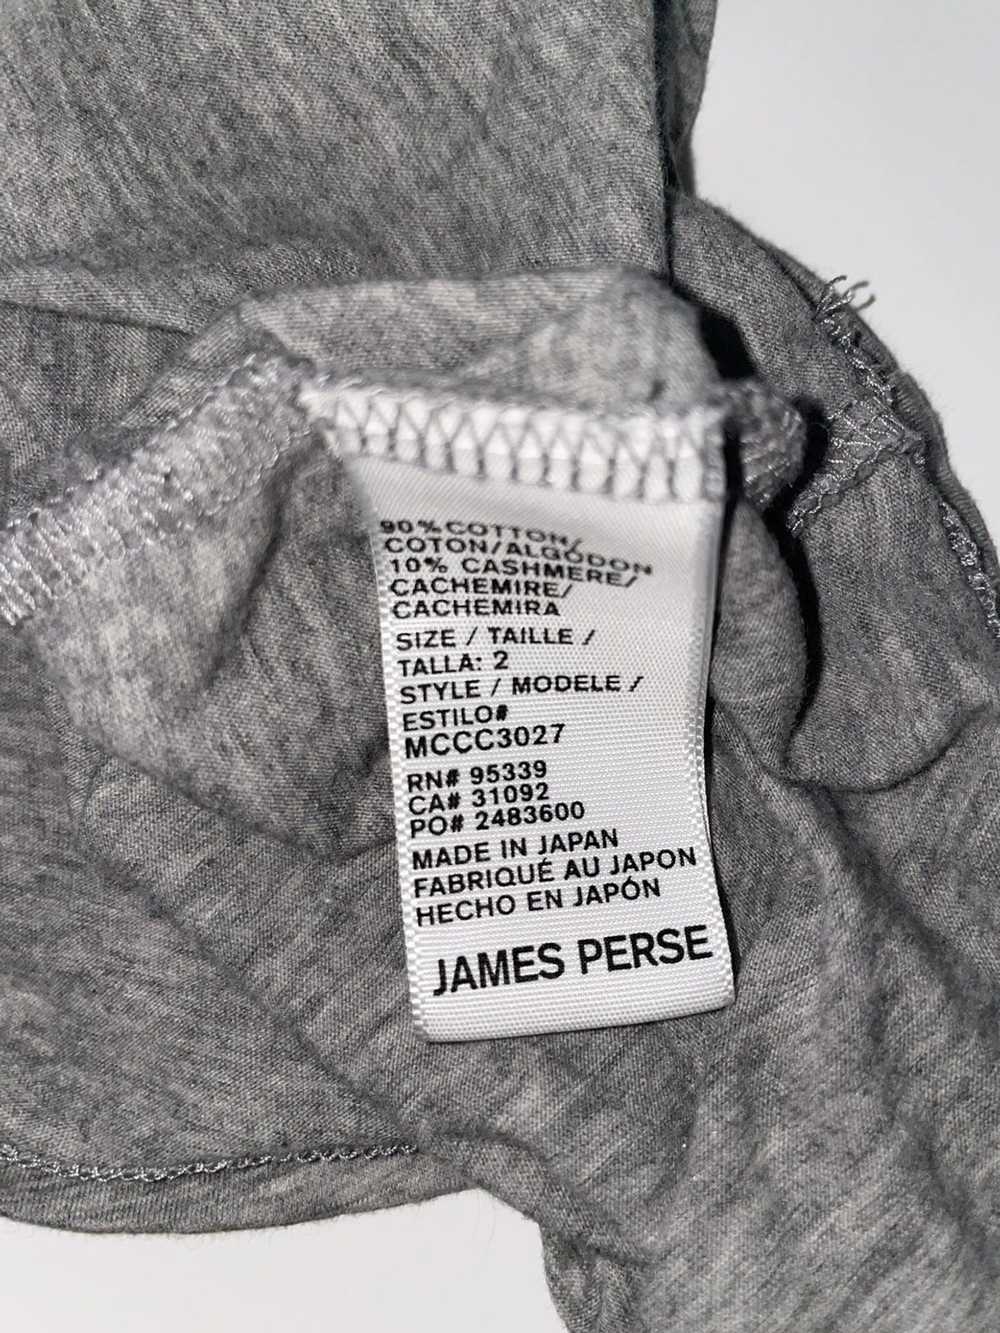 James Perse James Perse Long Sleeve - image 5